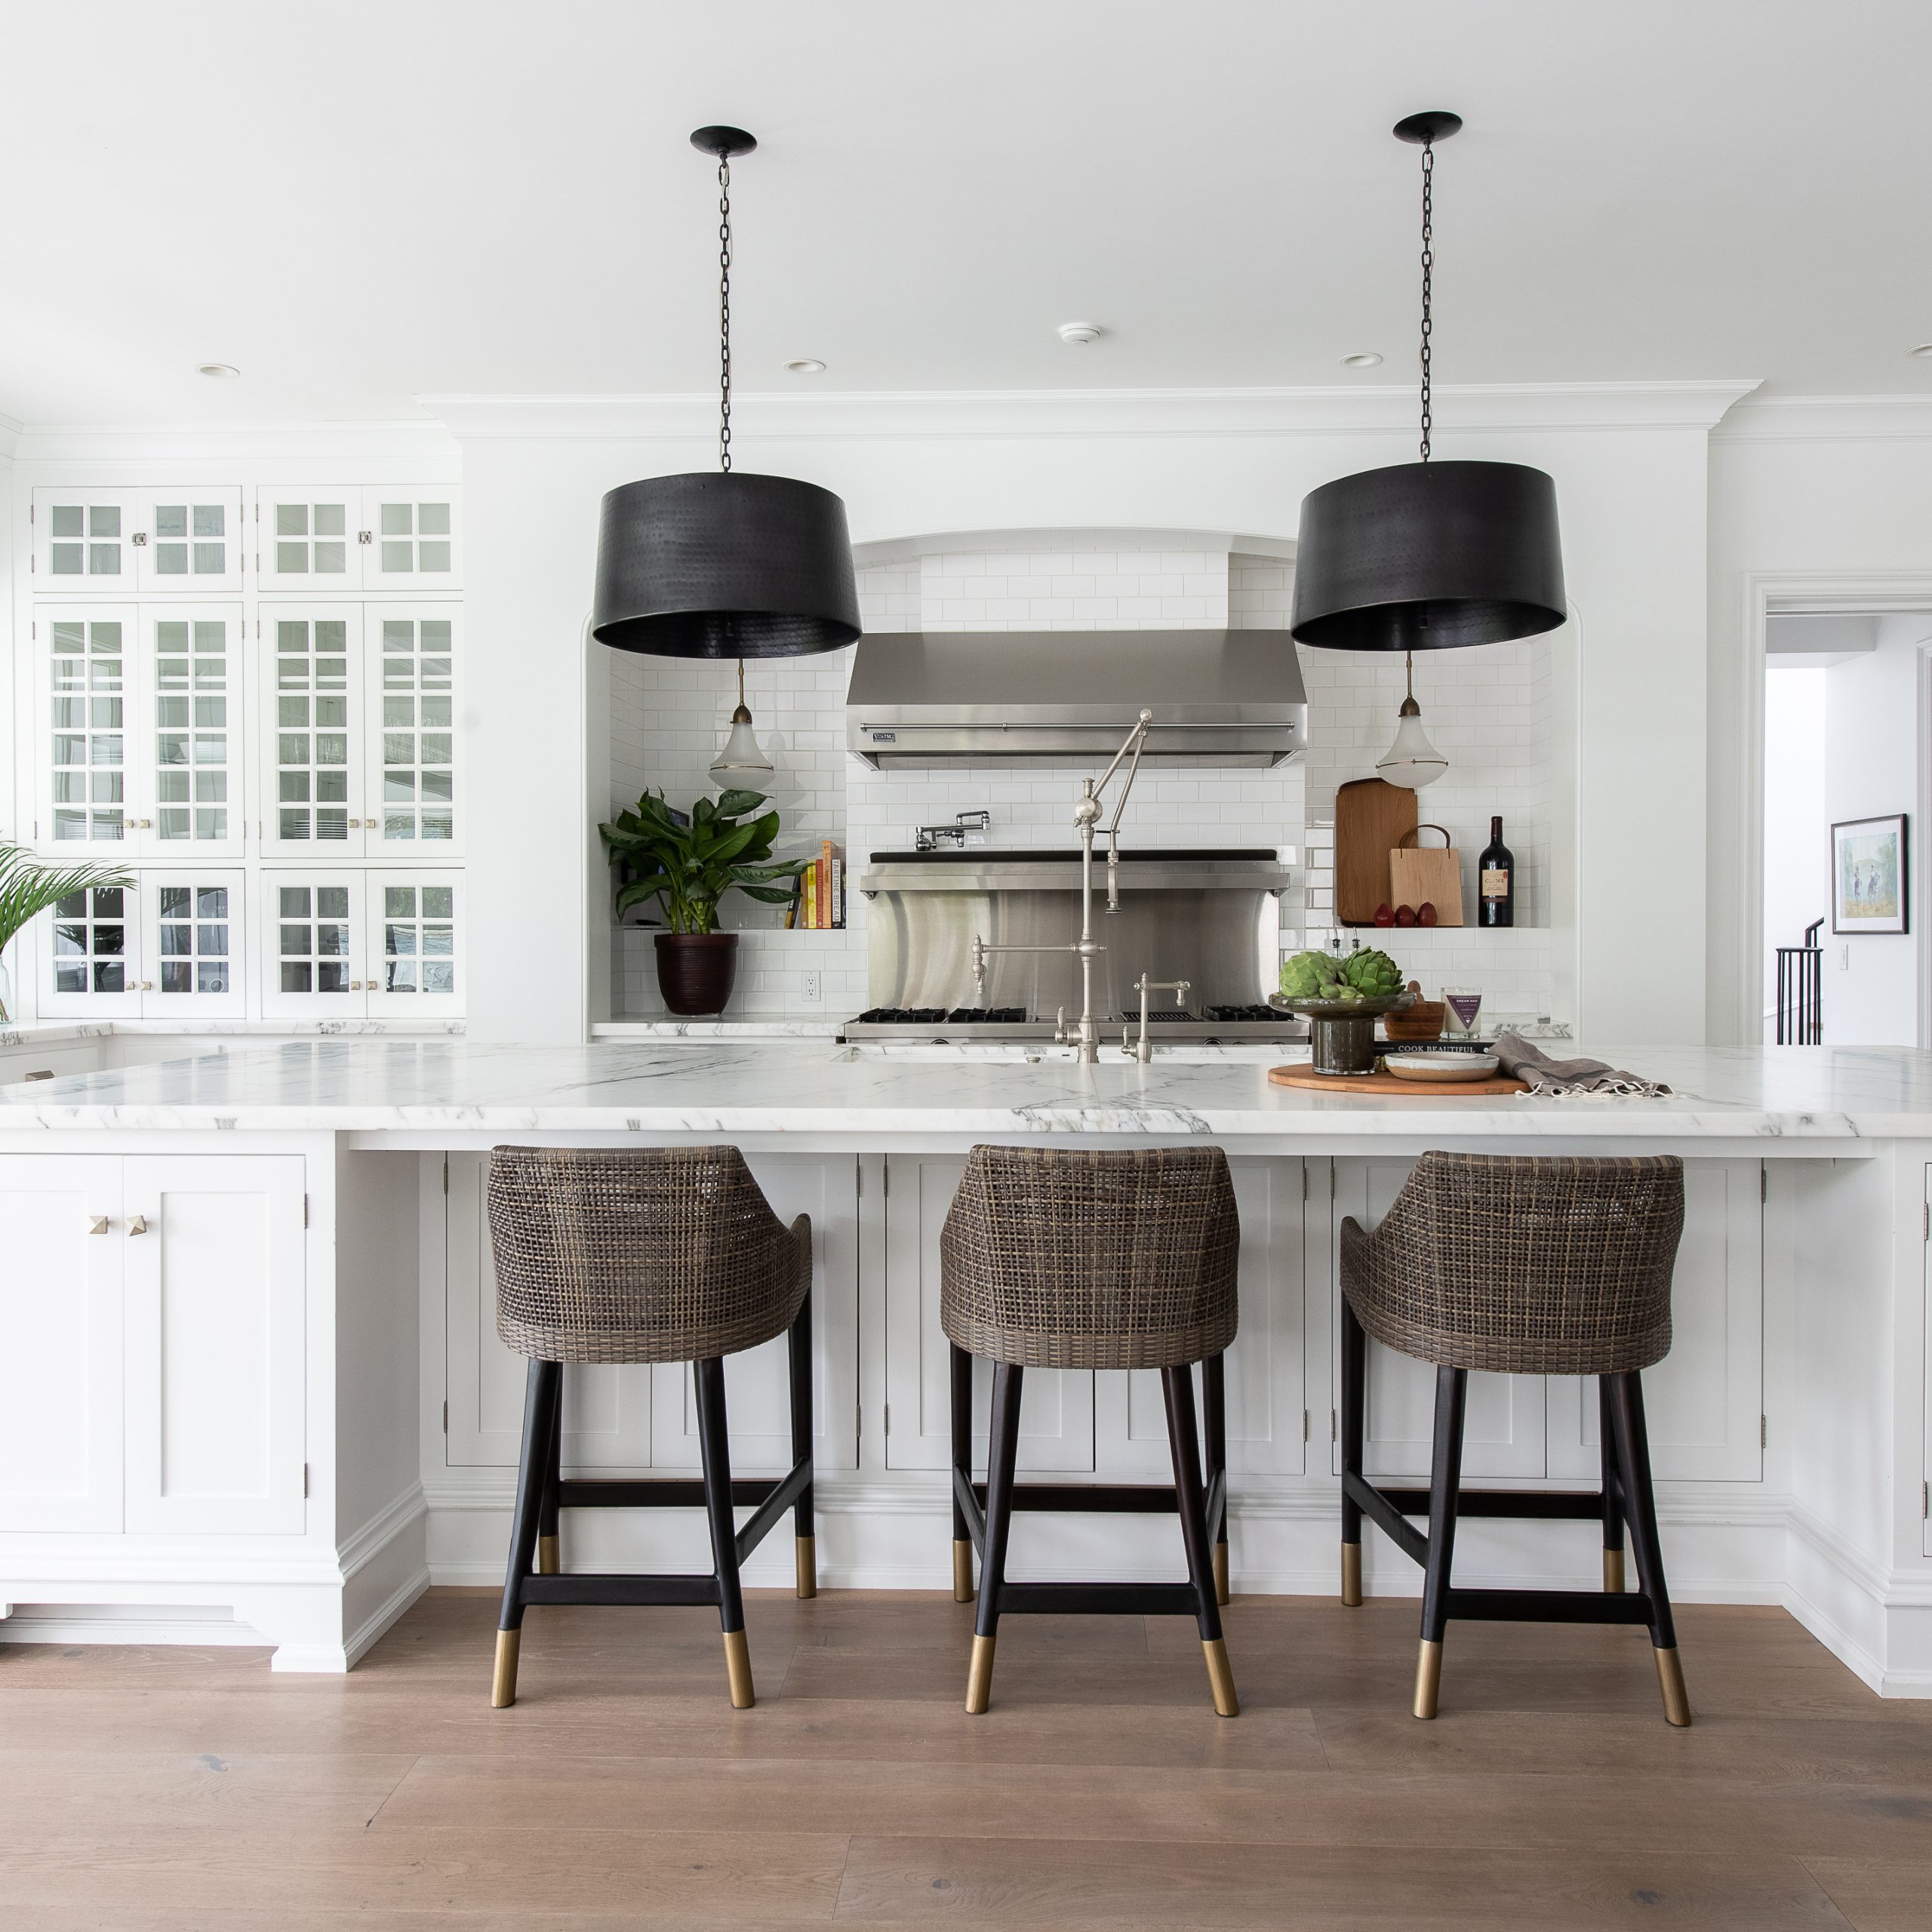 Lighting up the Kitchen: Illuminating Your Tabletop with the Perfect Overhead Fixture